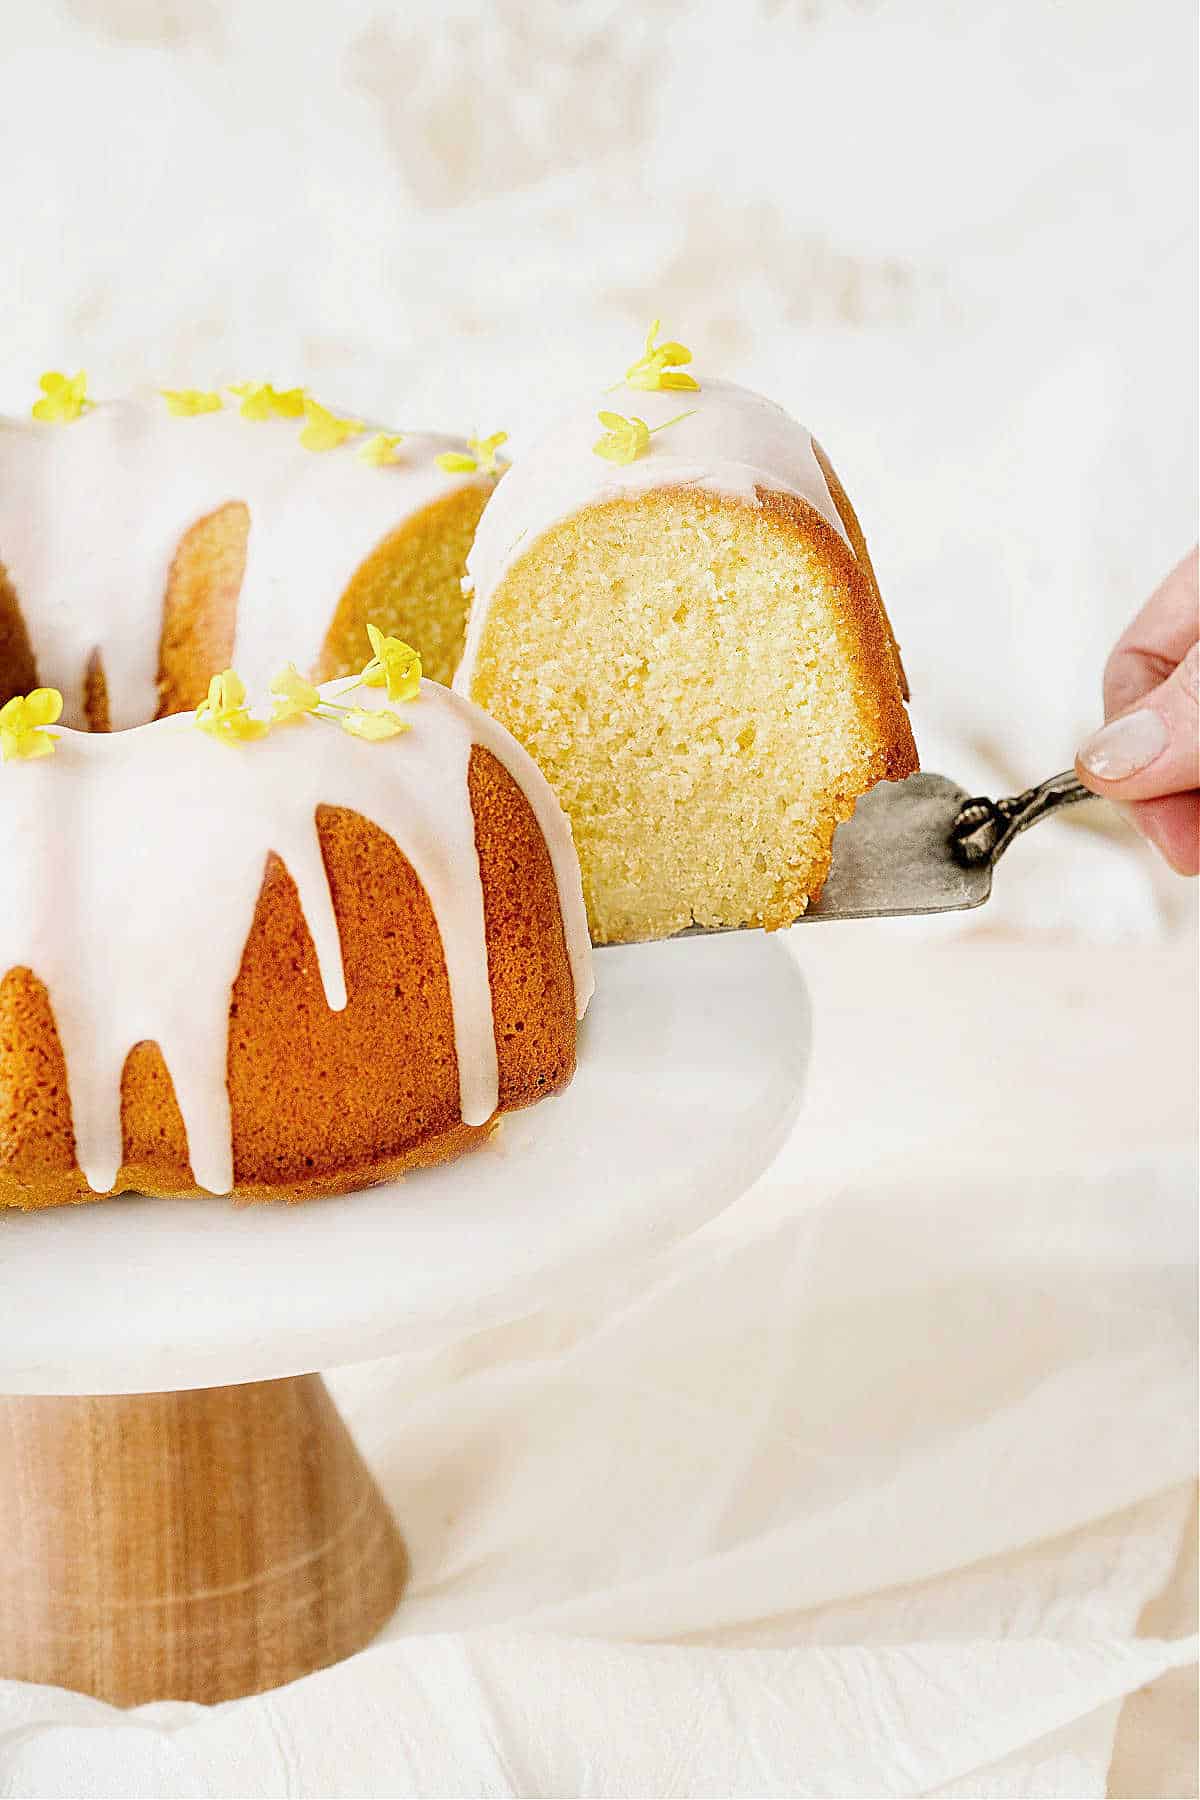 Partial view of glazed lemon bundt cake on a cake stand. A slice being pulled away. White background.